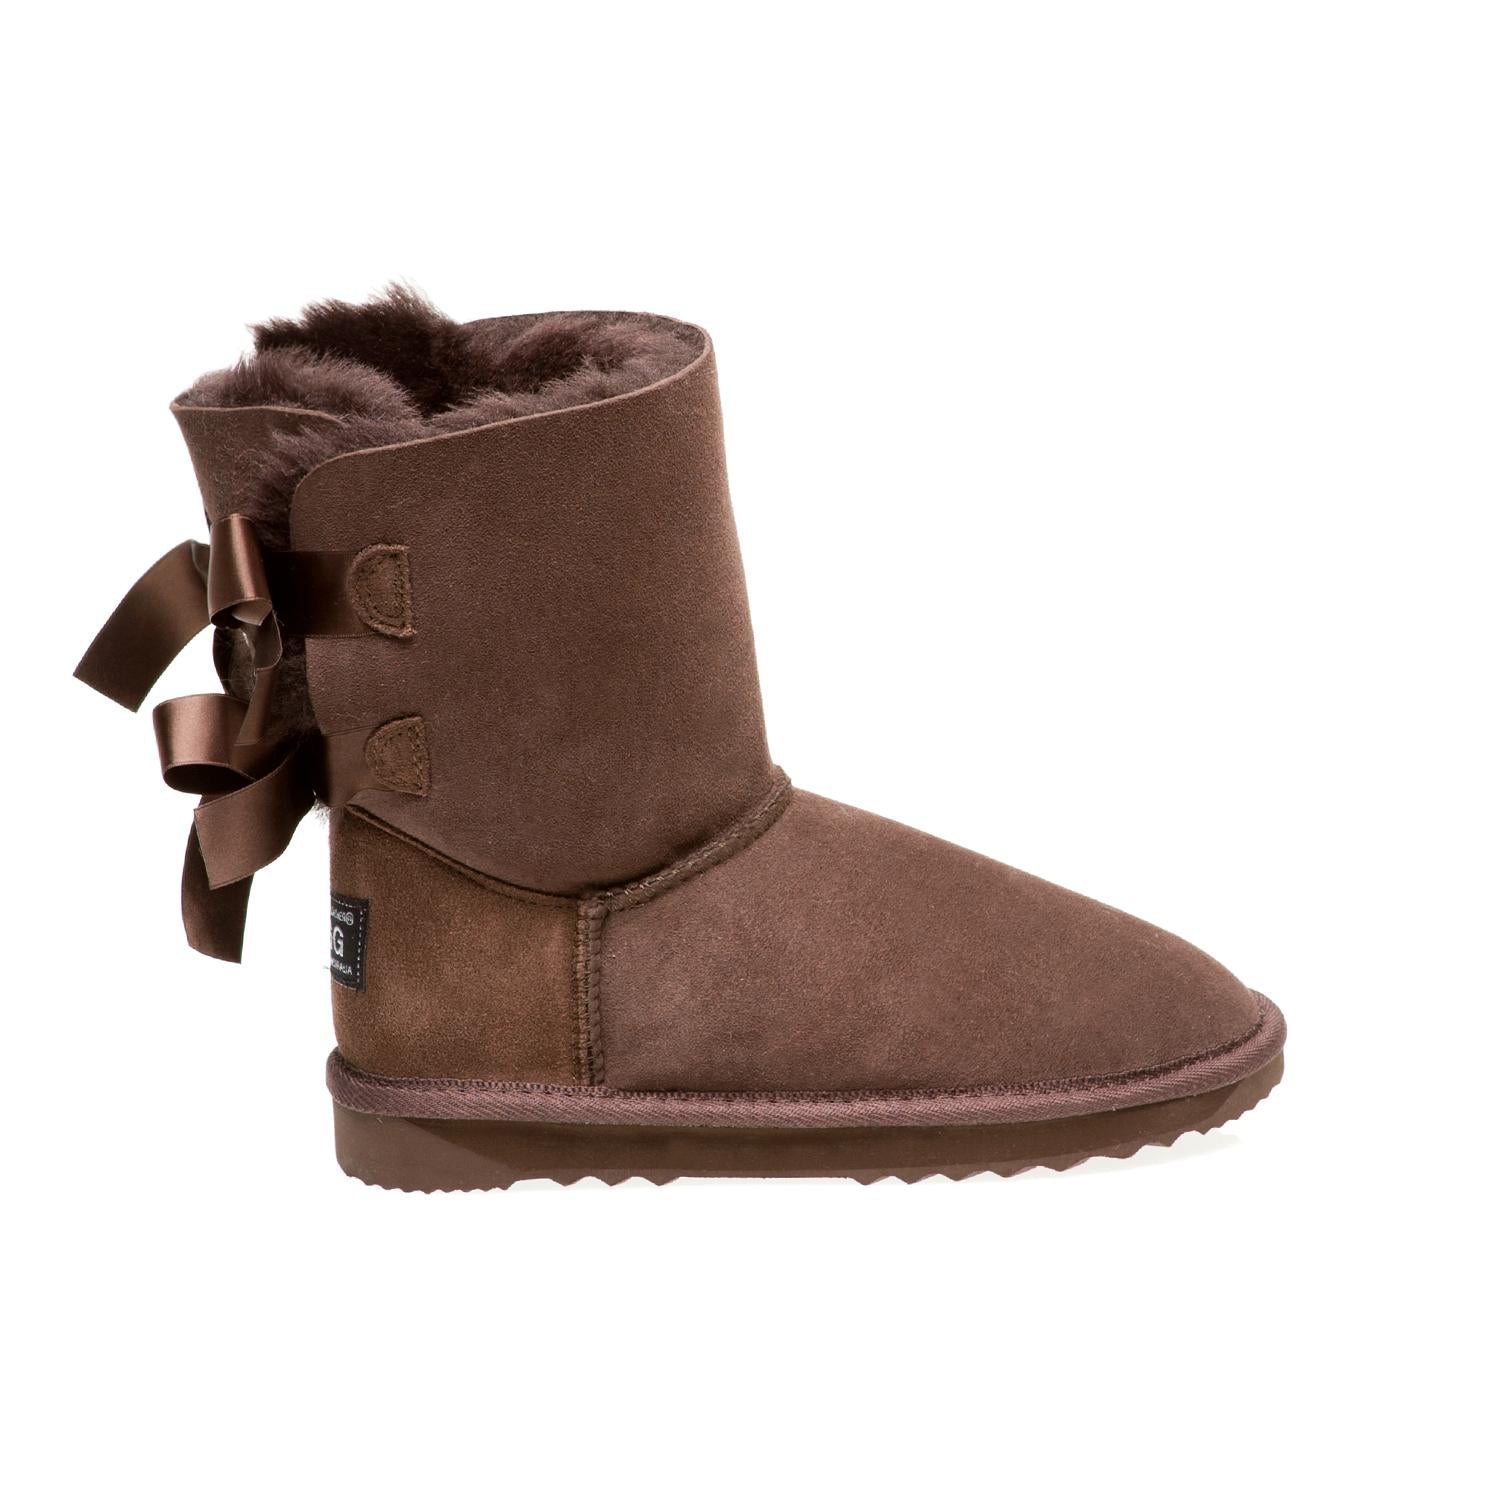 Classic Back Bows Ugg Boots | UGGLIFE